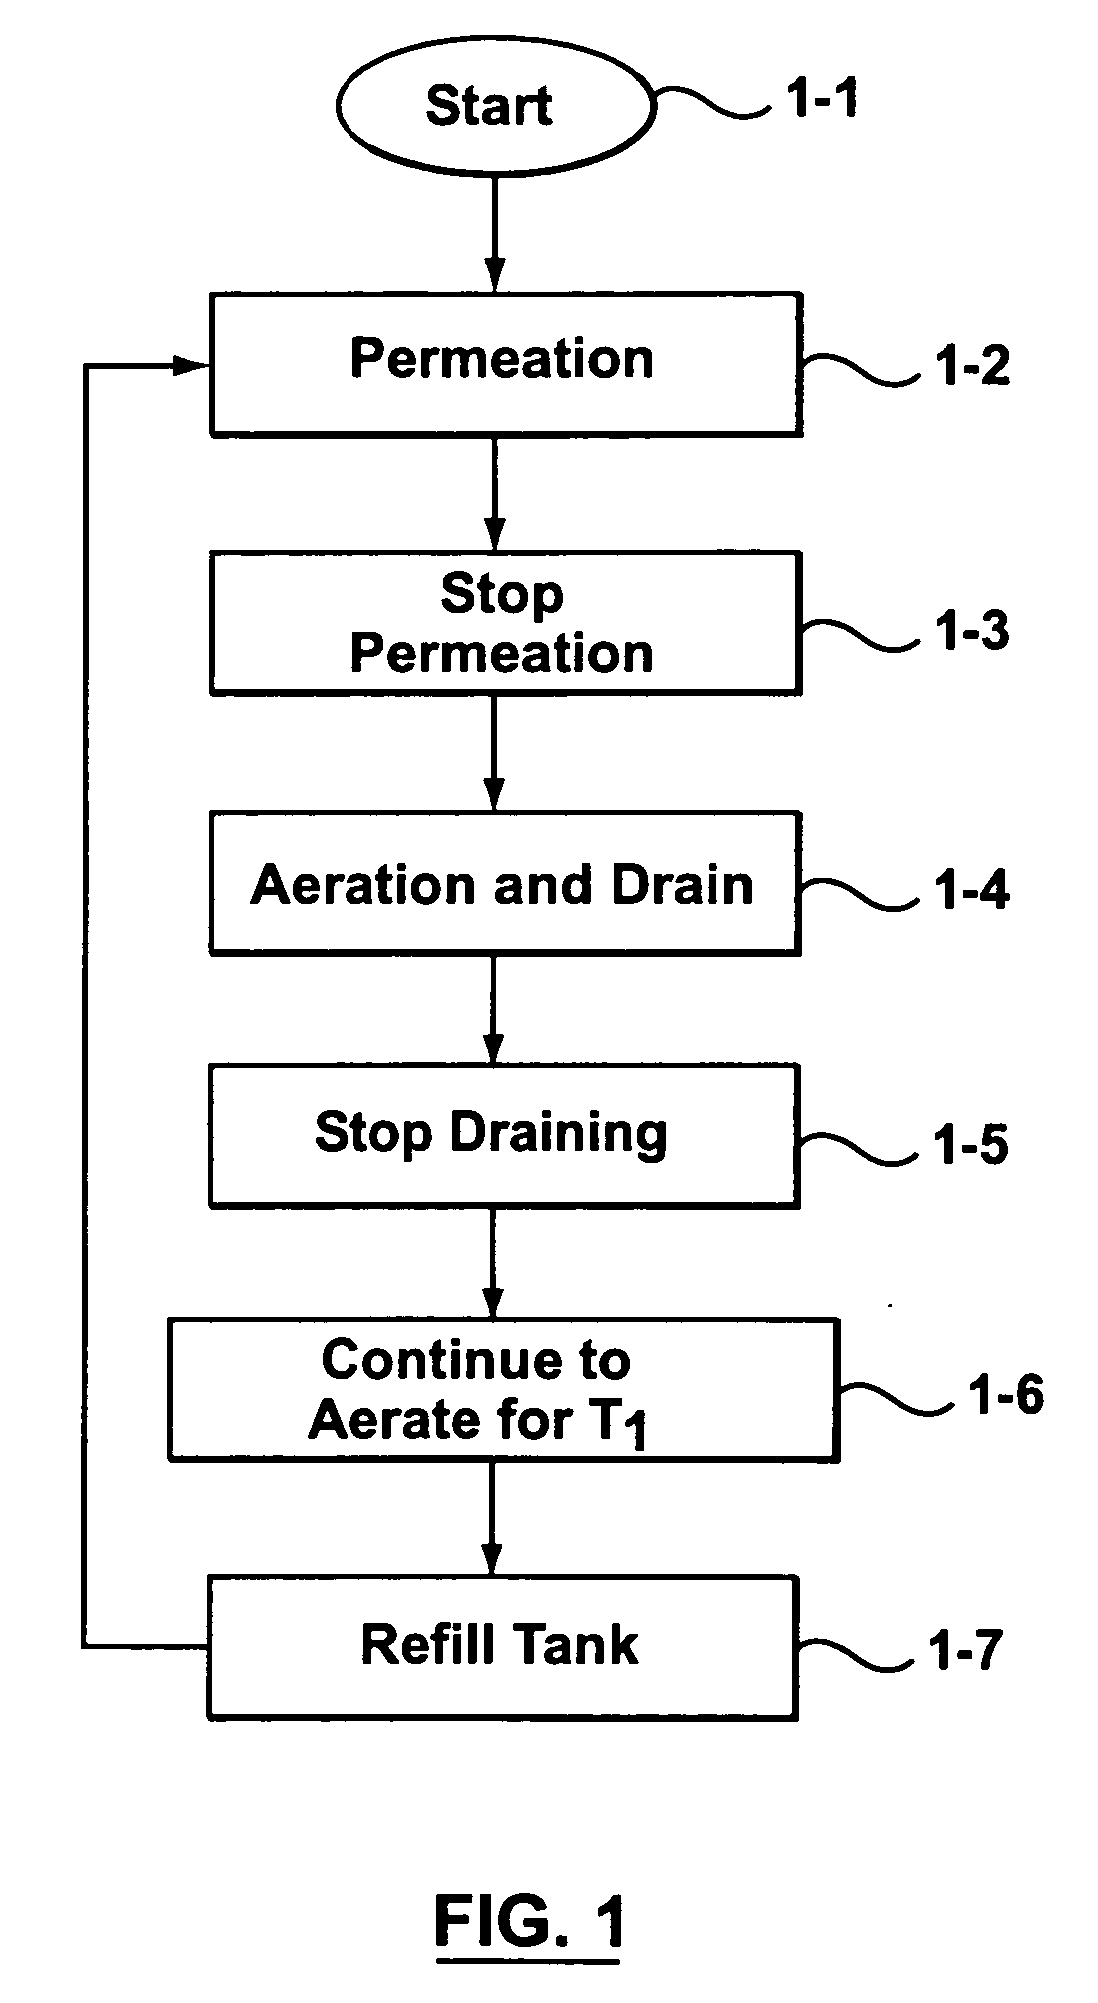 Membrane filter cleansing process